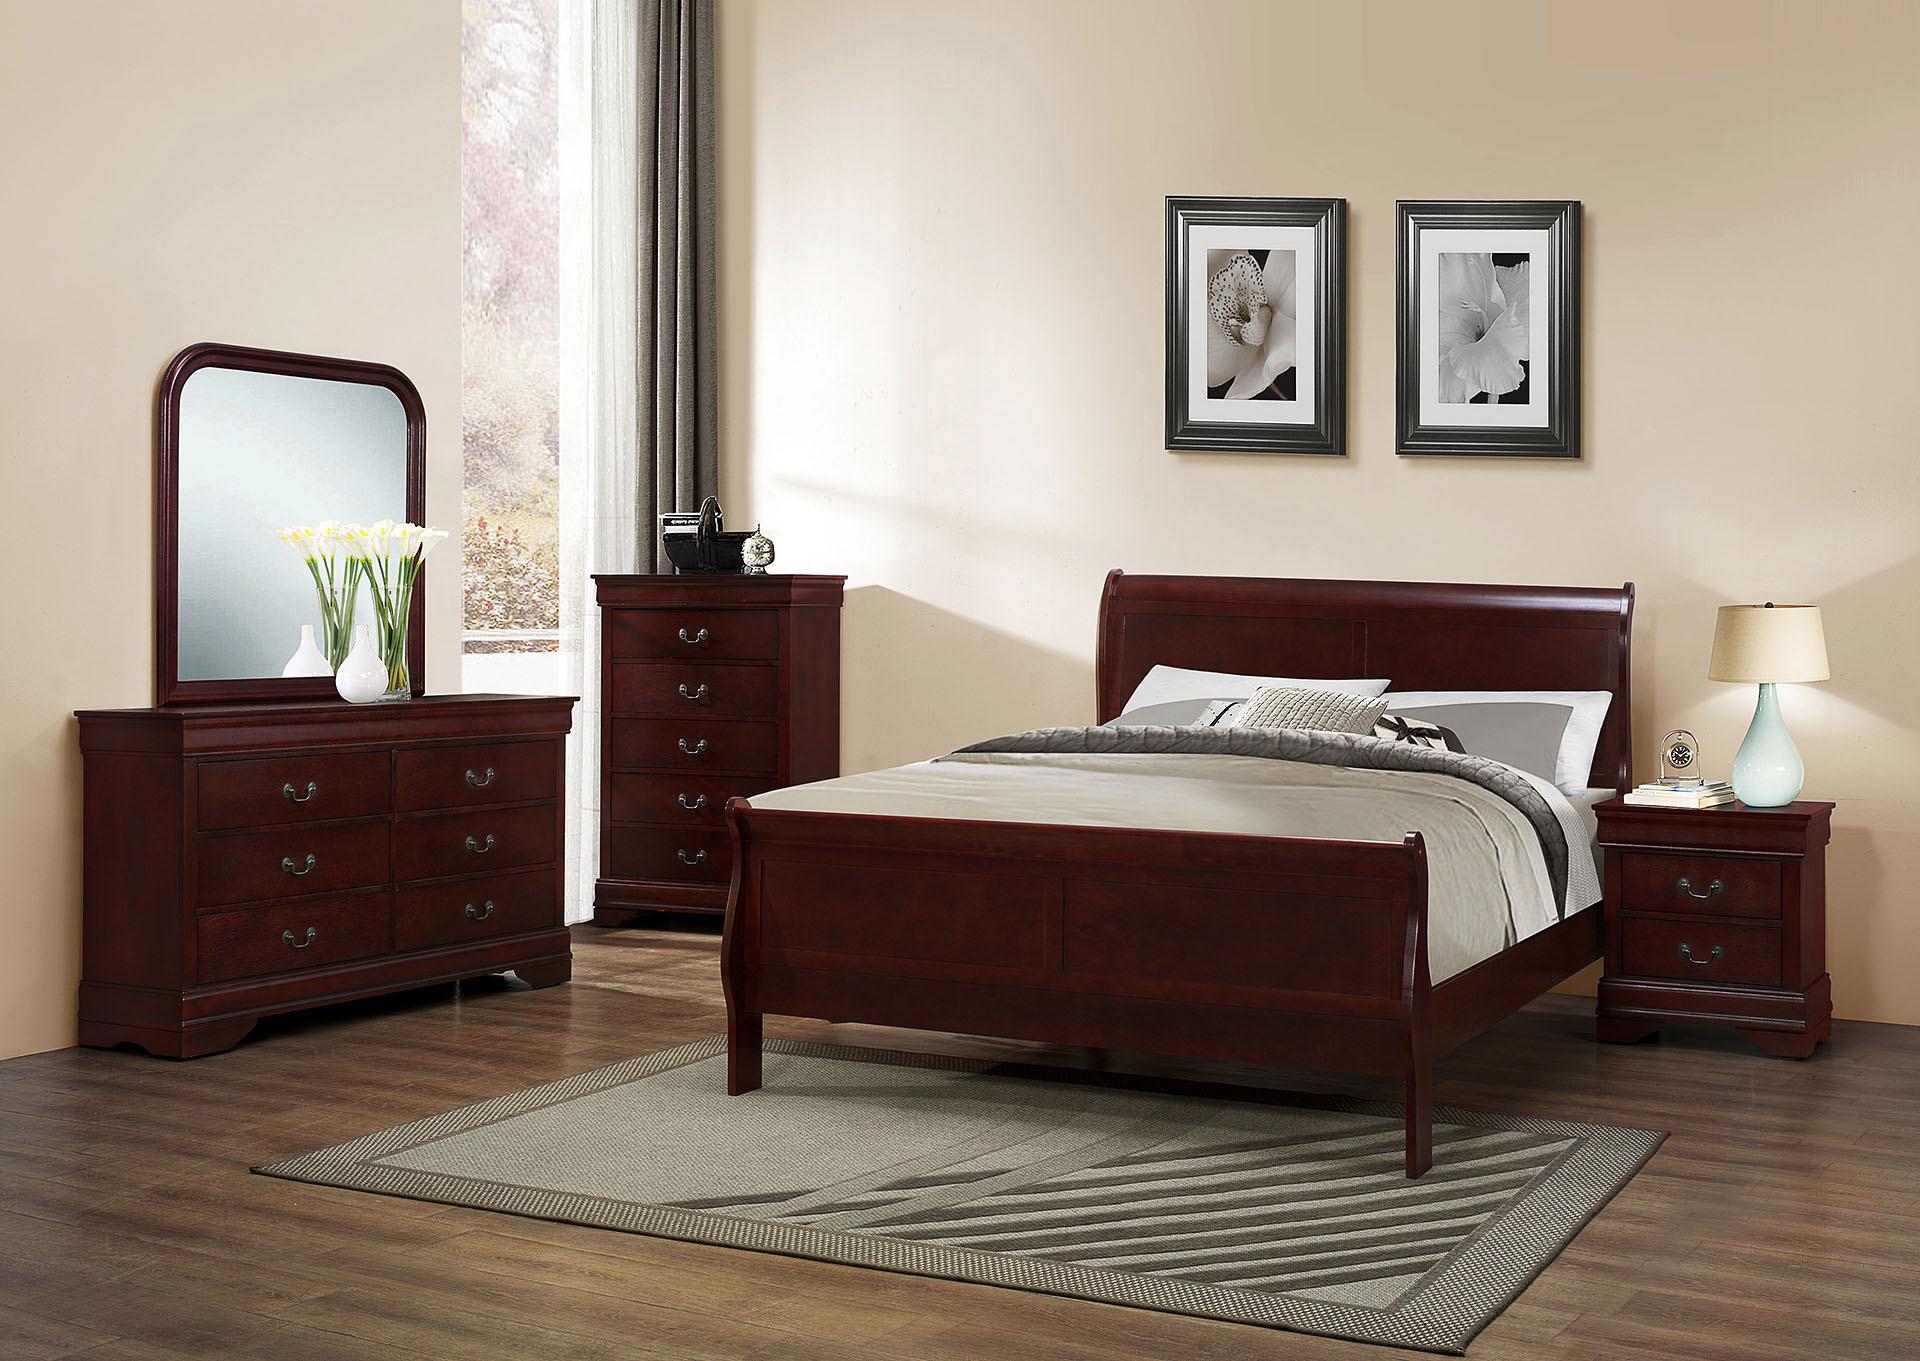 

    
Cherry King Bedroom Set 5 Pcs LOUIS PHILLIPE Galaxy Home Traditional Modern
